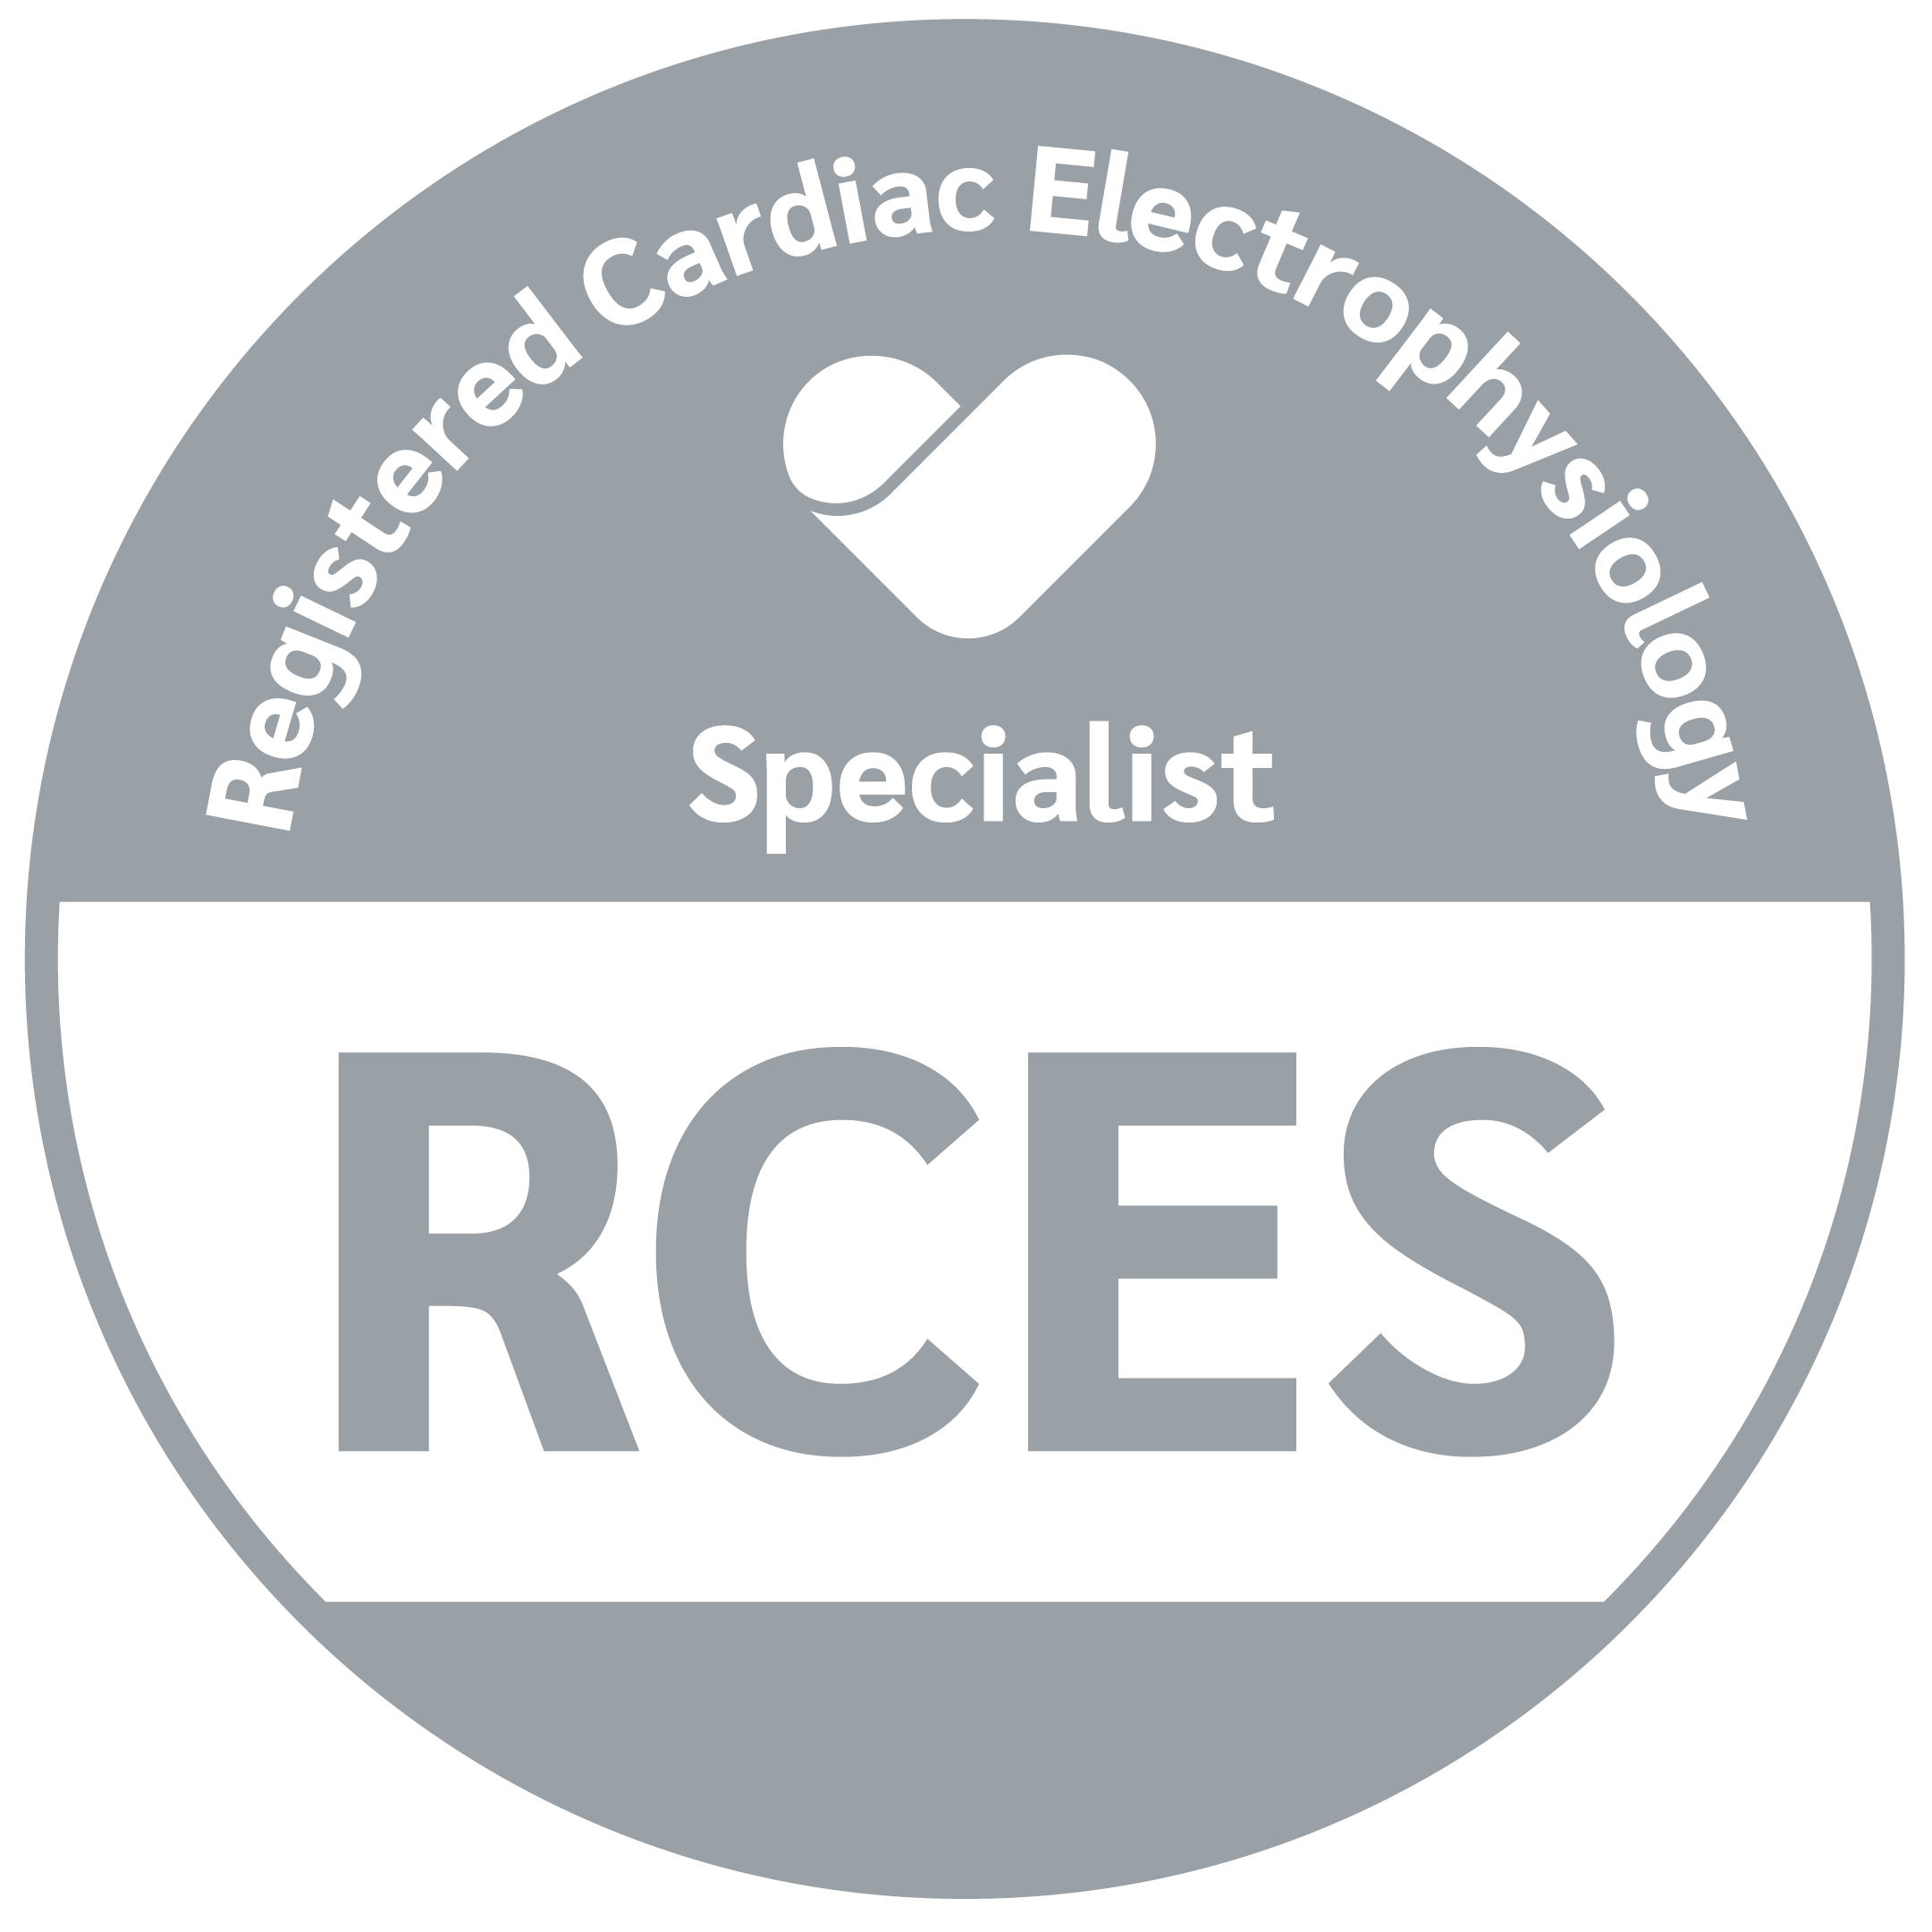 Registered Cardiac Electrophysiology Specialist exam with CCI